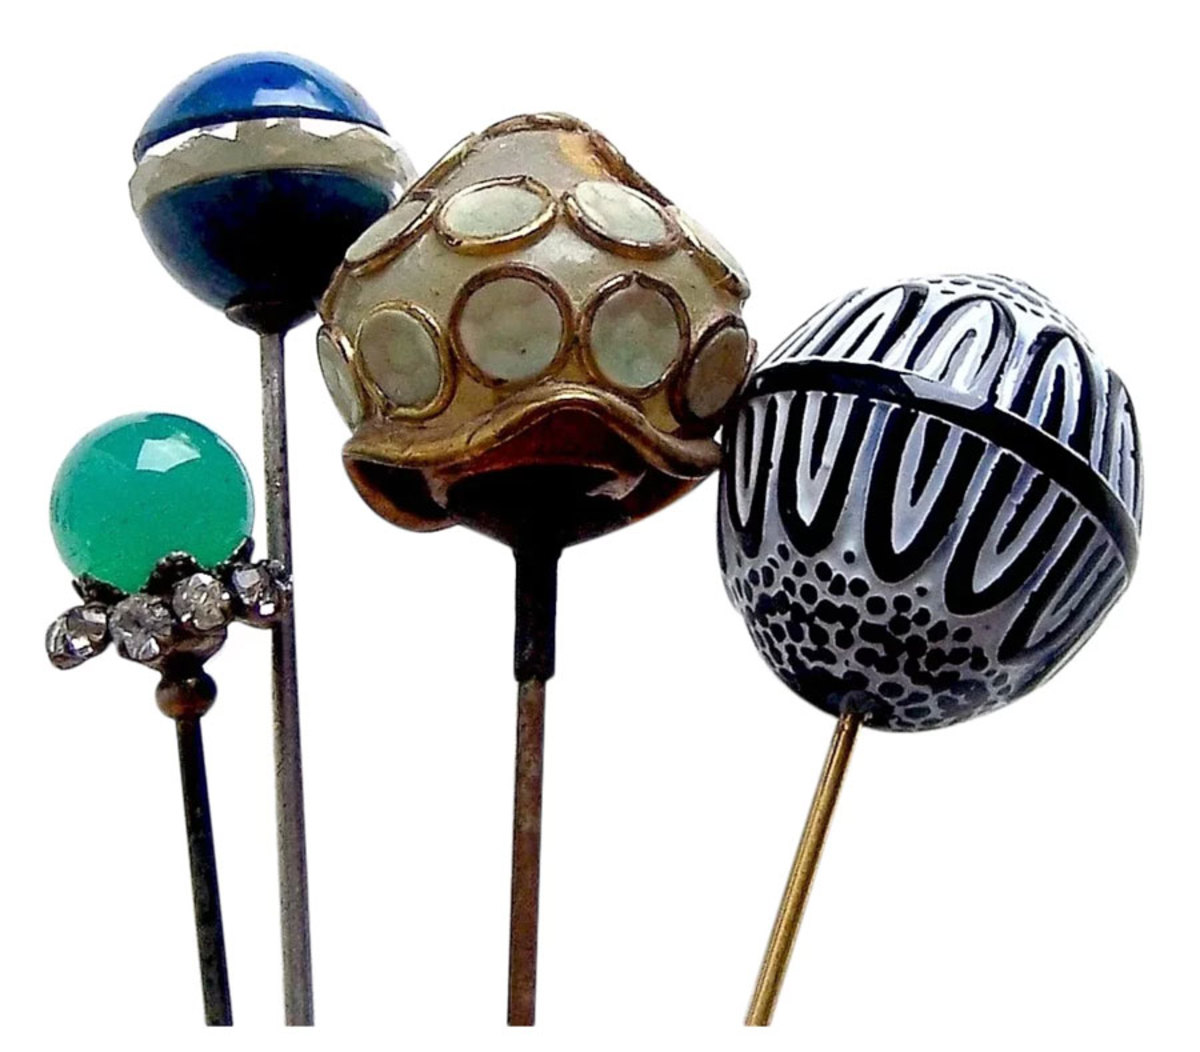 A collection of ceramic and fancy glass Edwardian hatpins, ranging from 8" h to 10" h; $150.